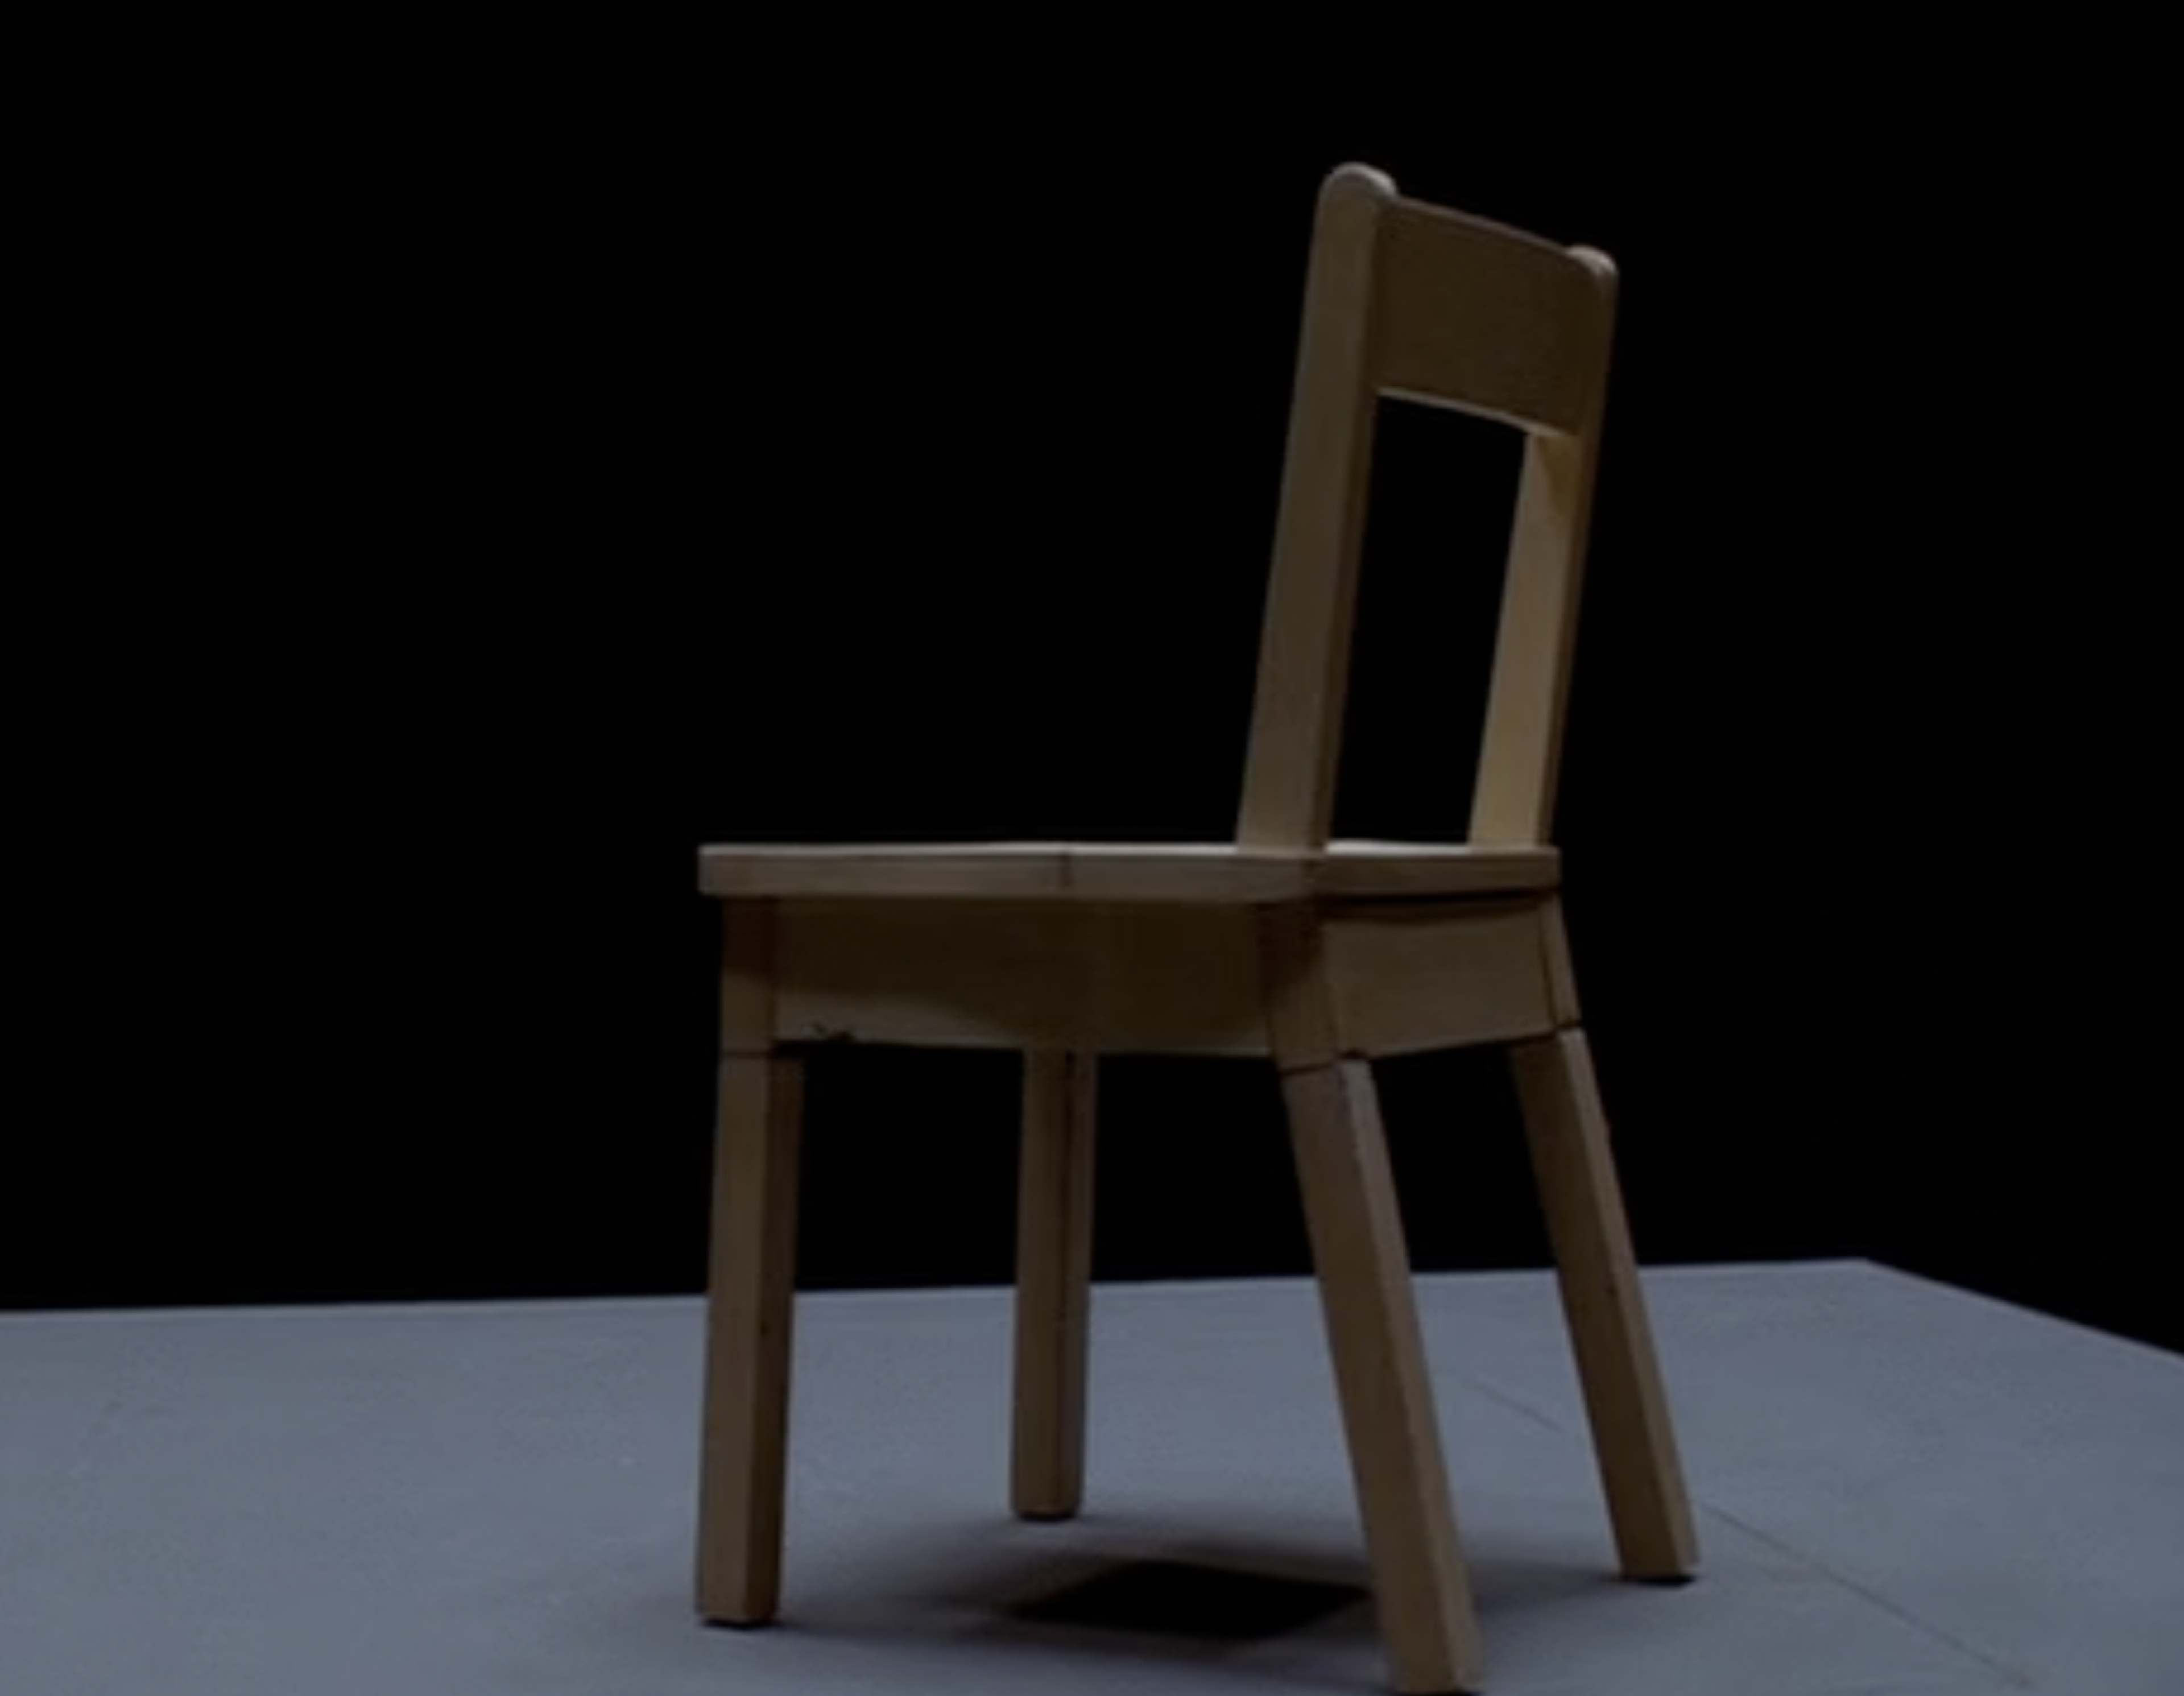 The Robotic Chair